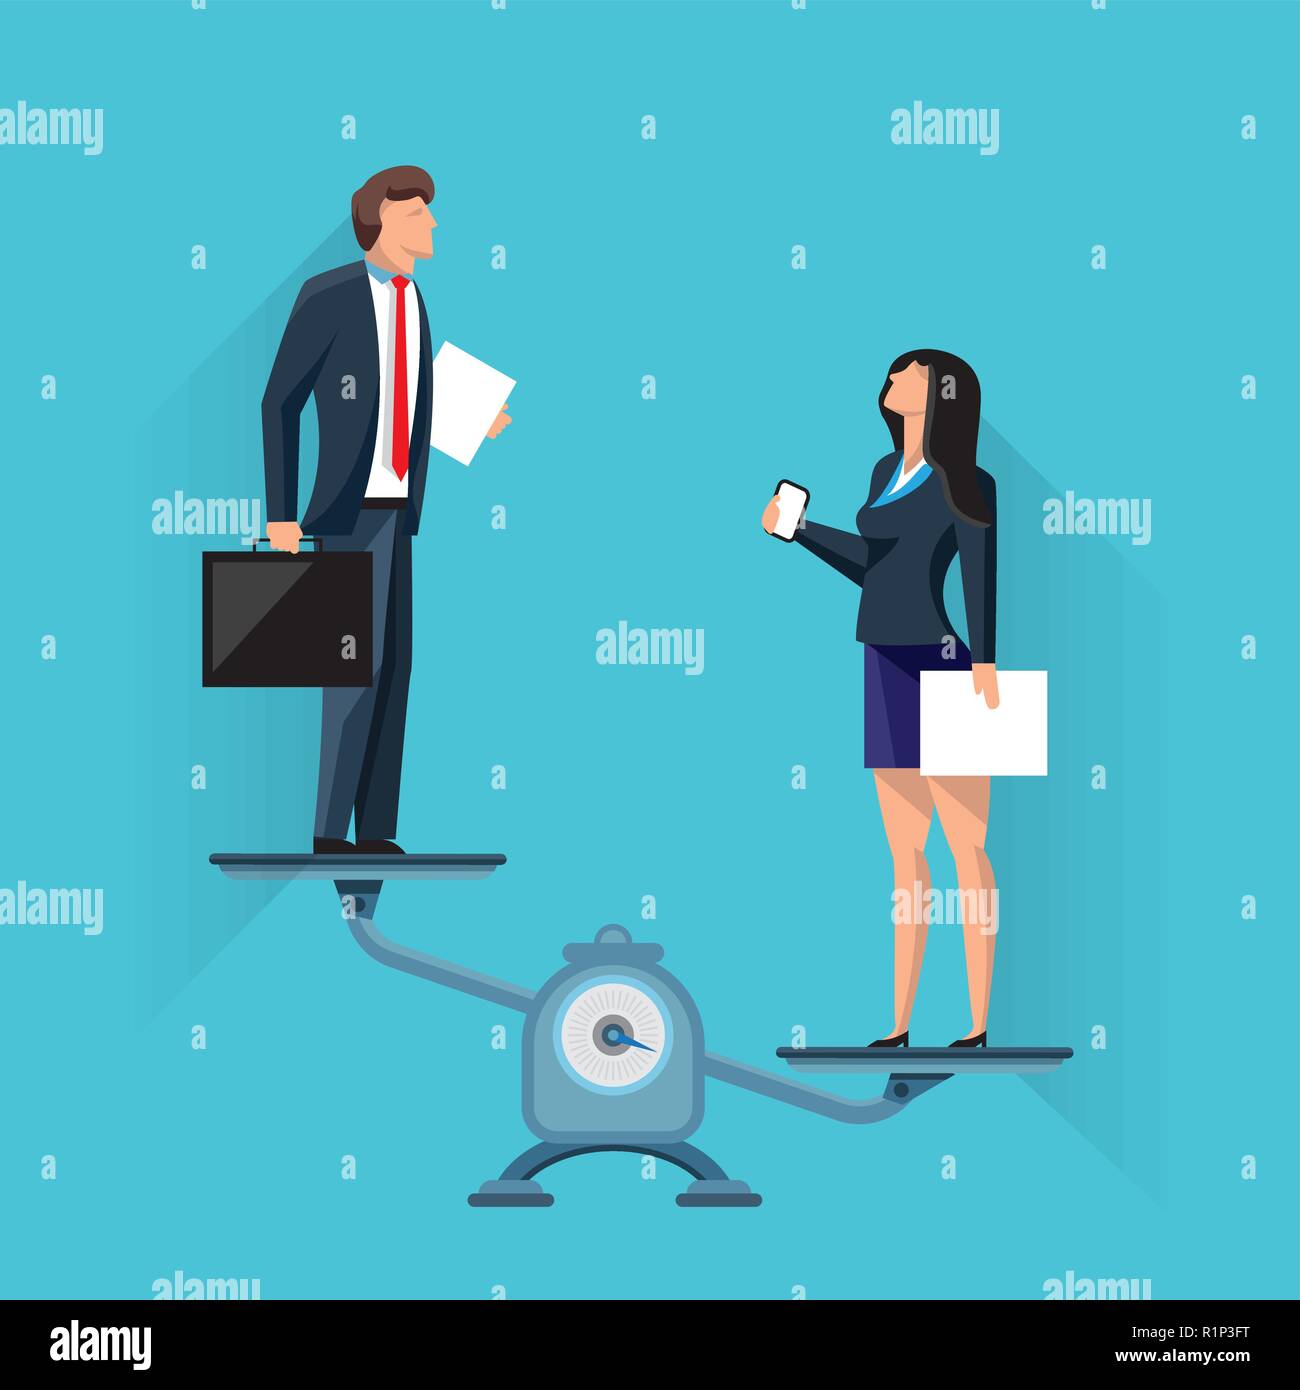 Businesspeople standing on scales in imbalance Stock Vector